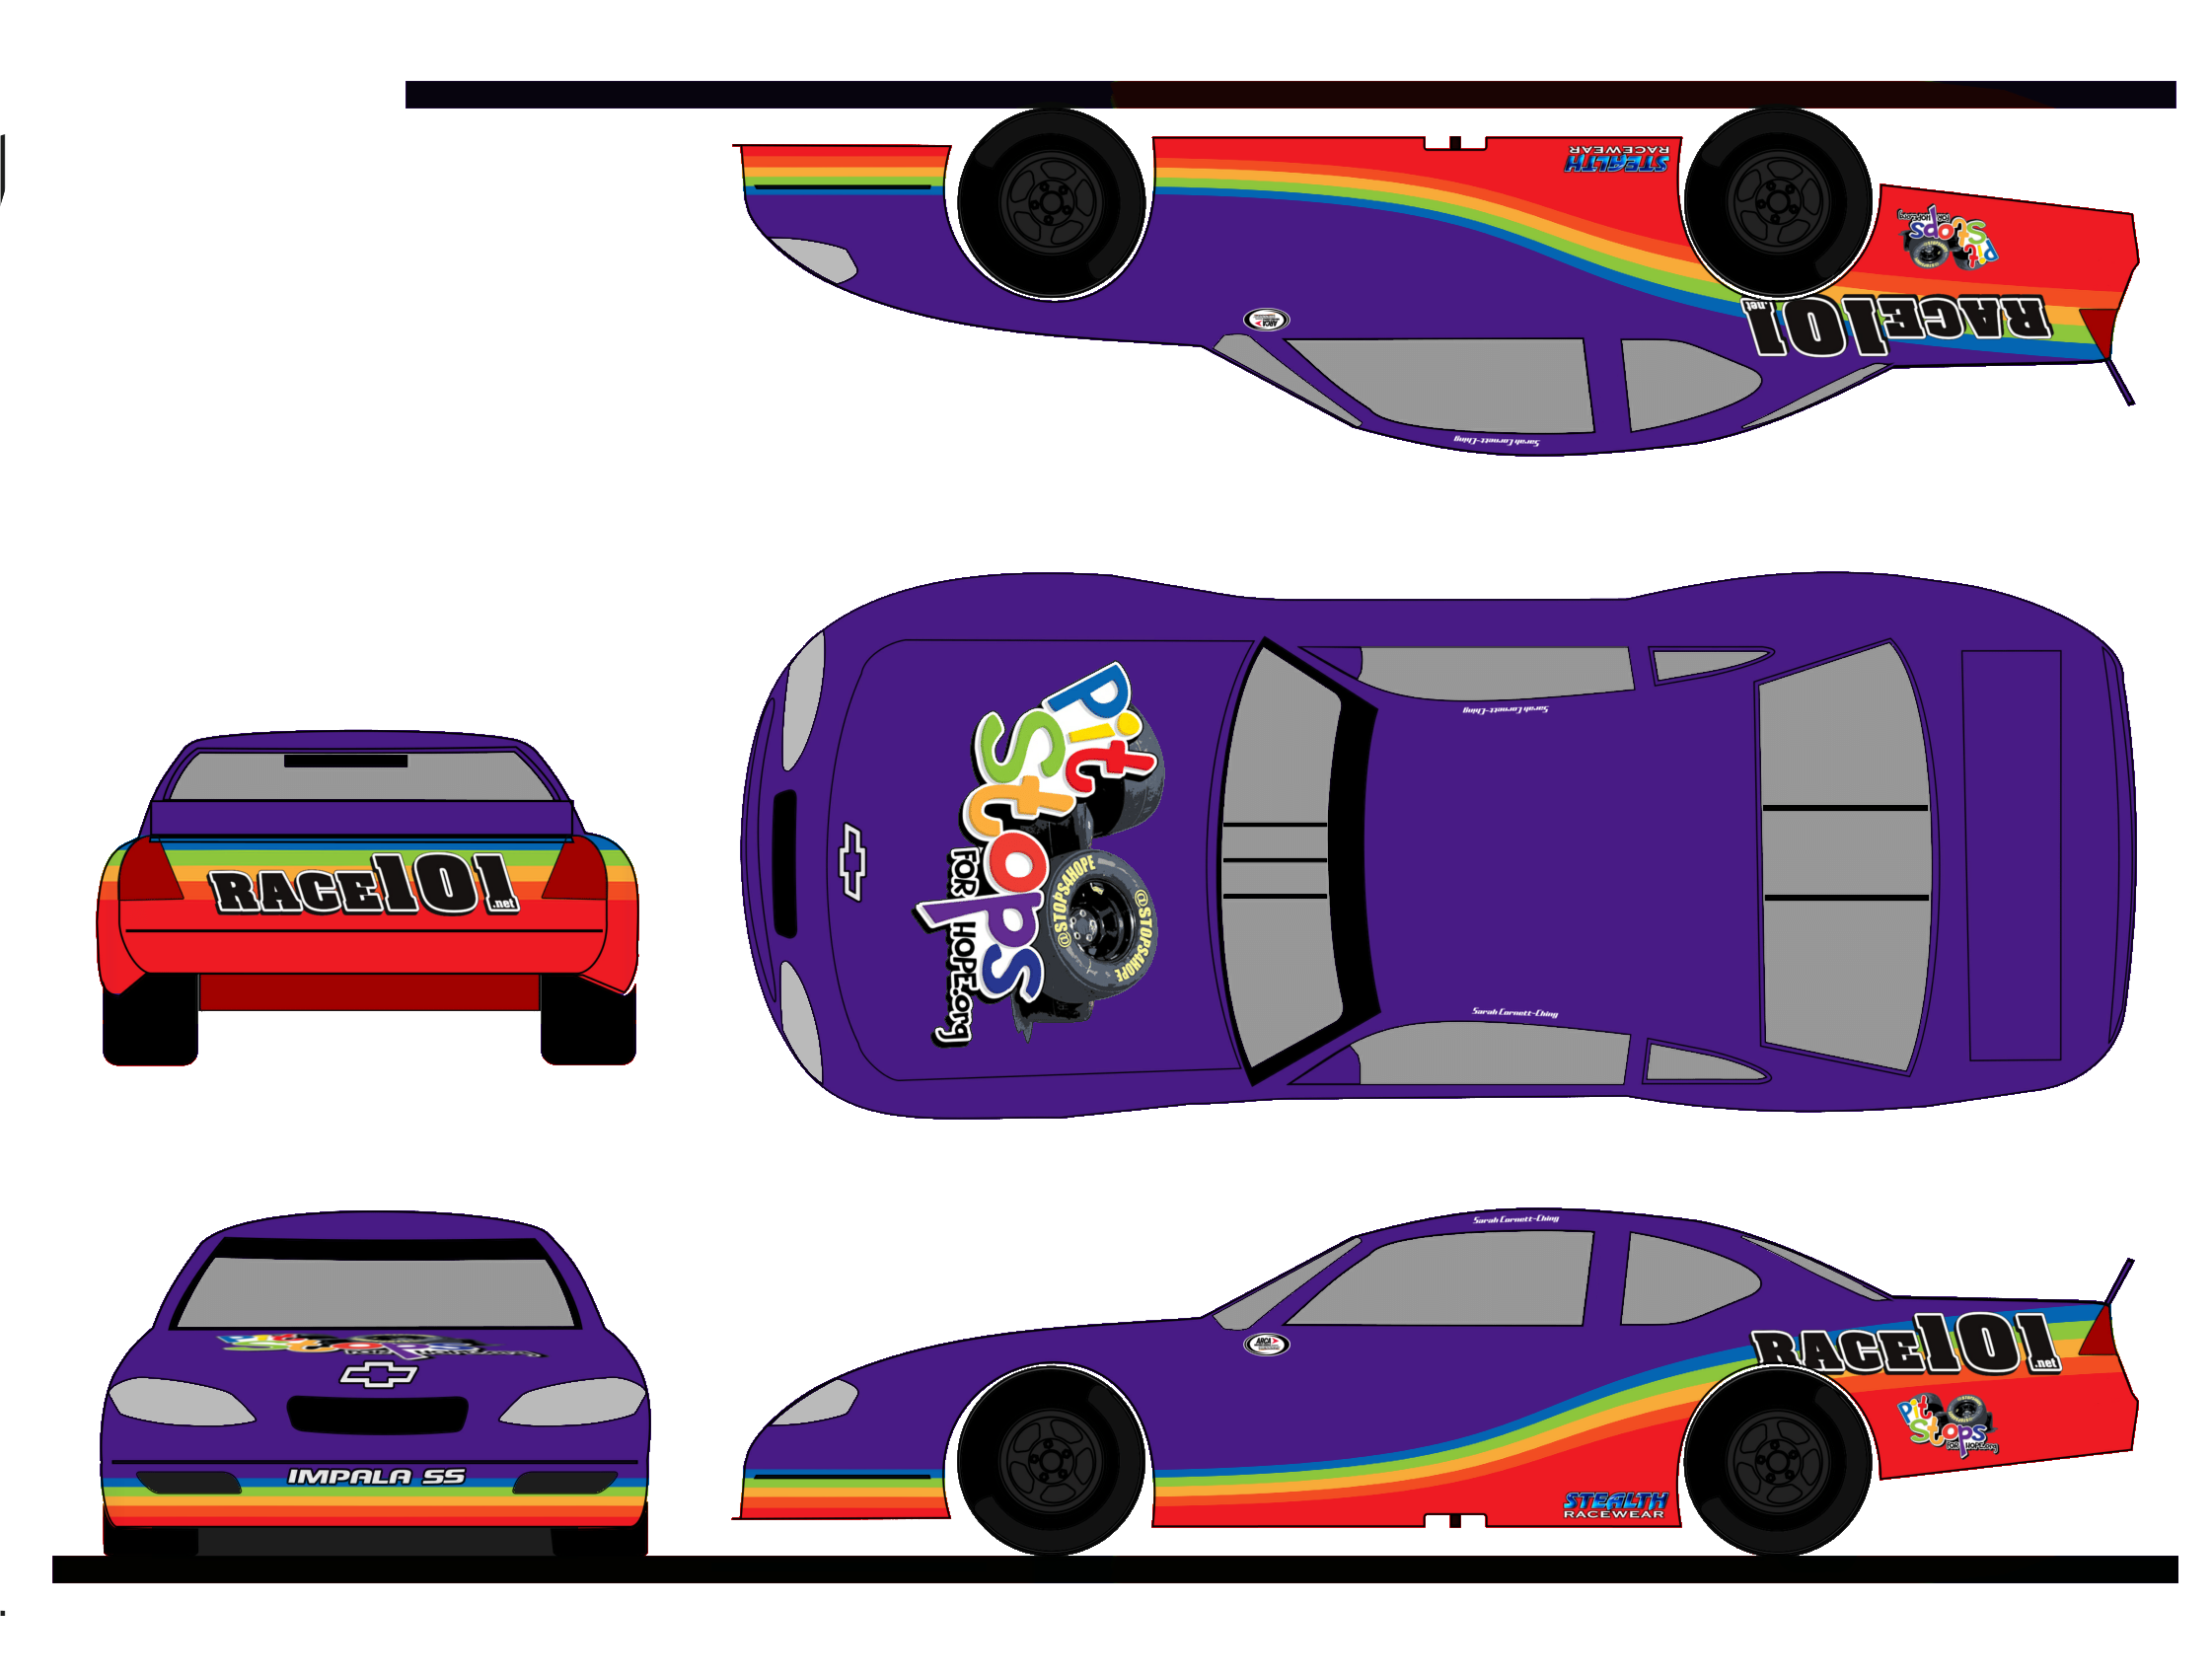 10 Steps To Create A Paint Scheme Mockup  The Colors Of The Race Intended For Blank Race Car Templates